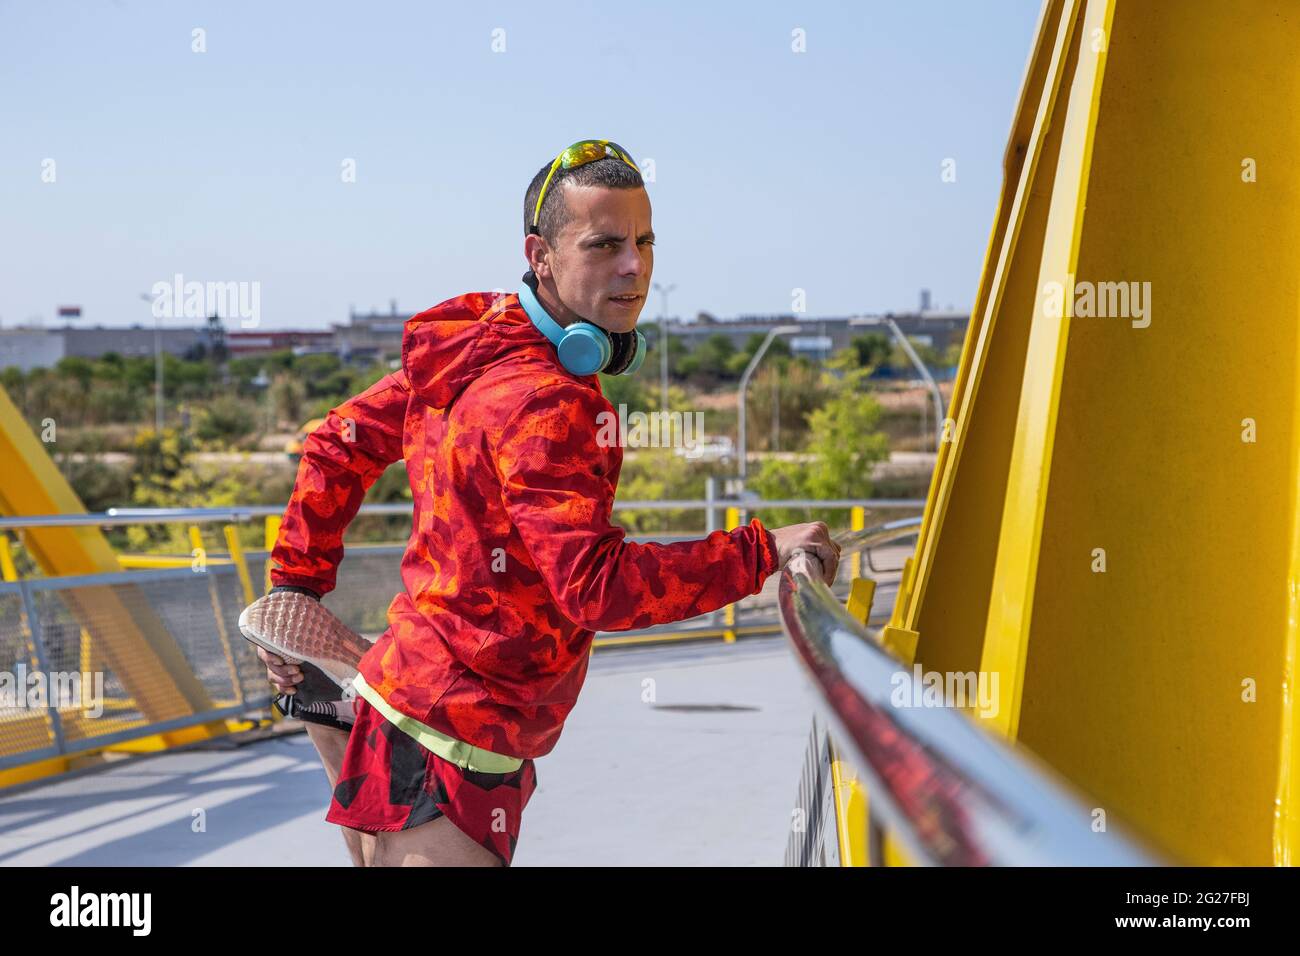 Runner warming up on a yellow bridge outdoors Stock Photo